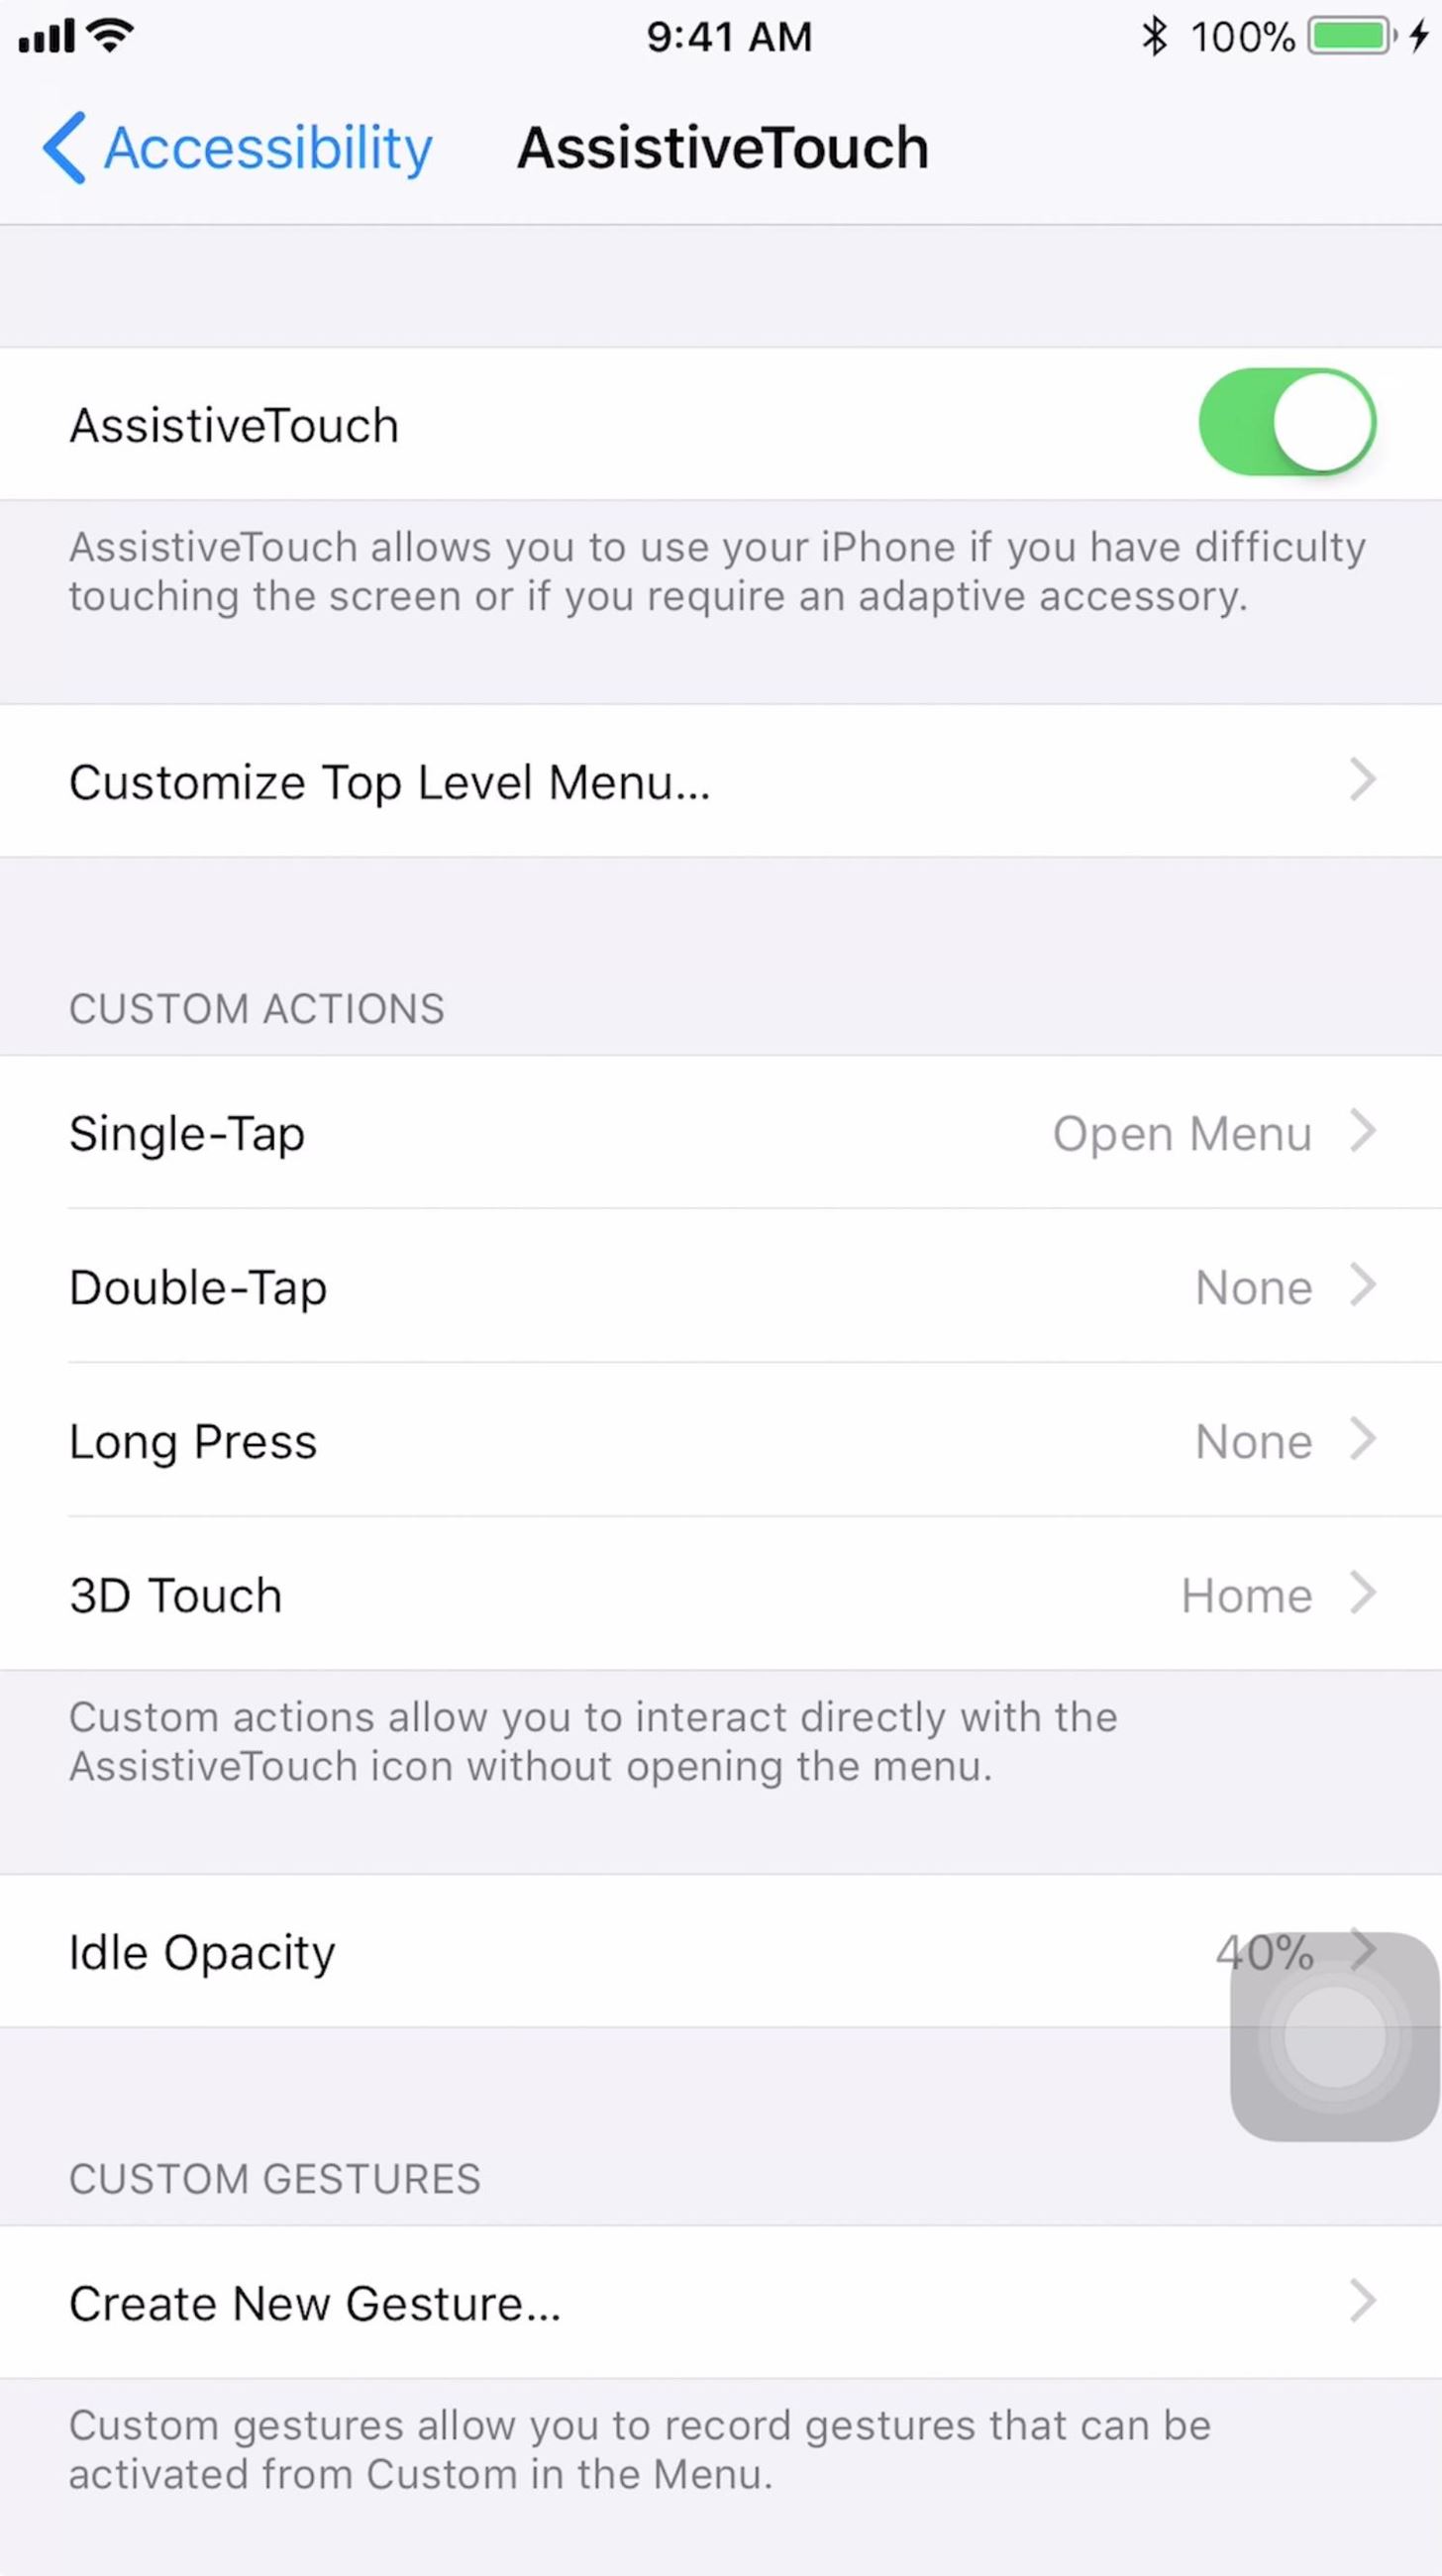 How to Set Up Grandma's First iPhone (A Guide for Newbie iOS Users)